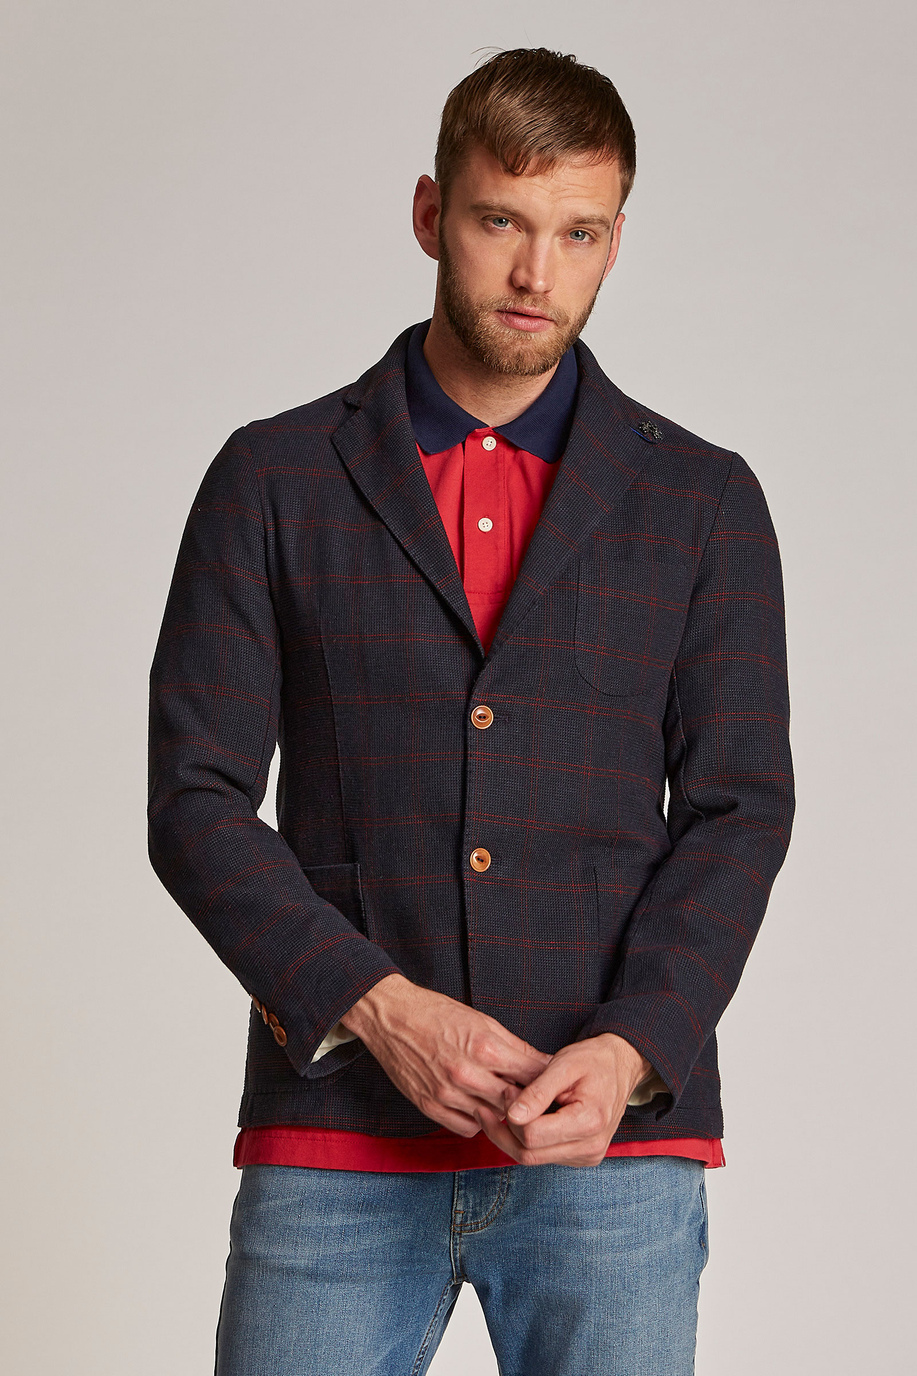 Men's regular-fit cotton blazer with a two-button fastening | La Martina - Official Online Shop